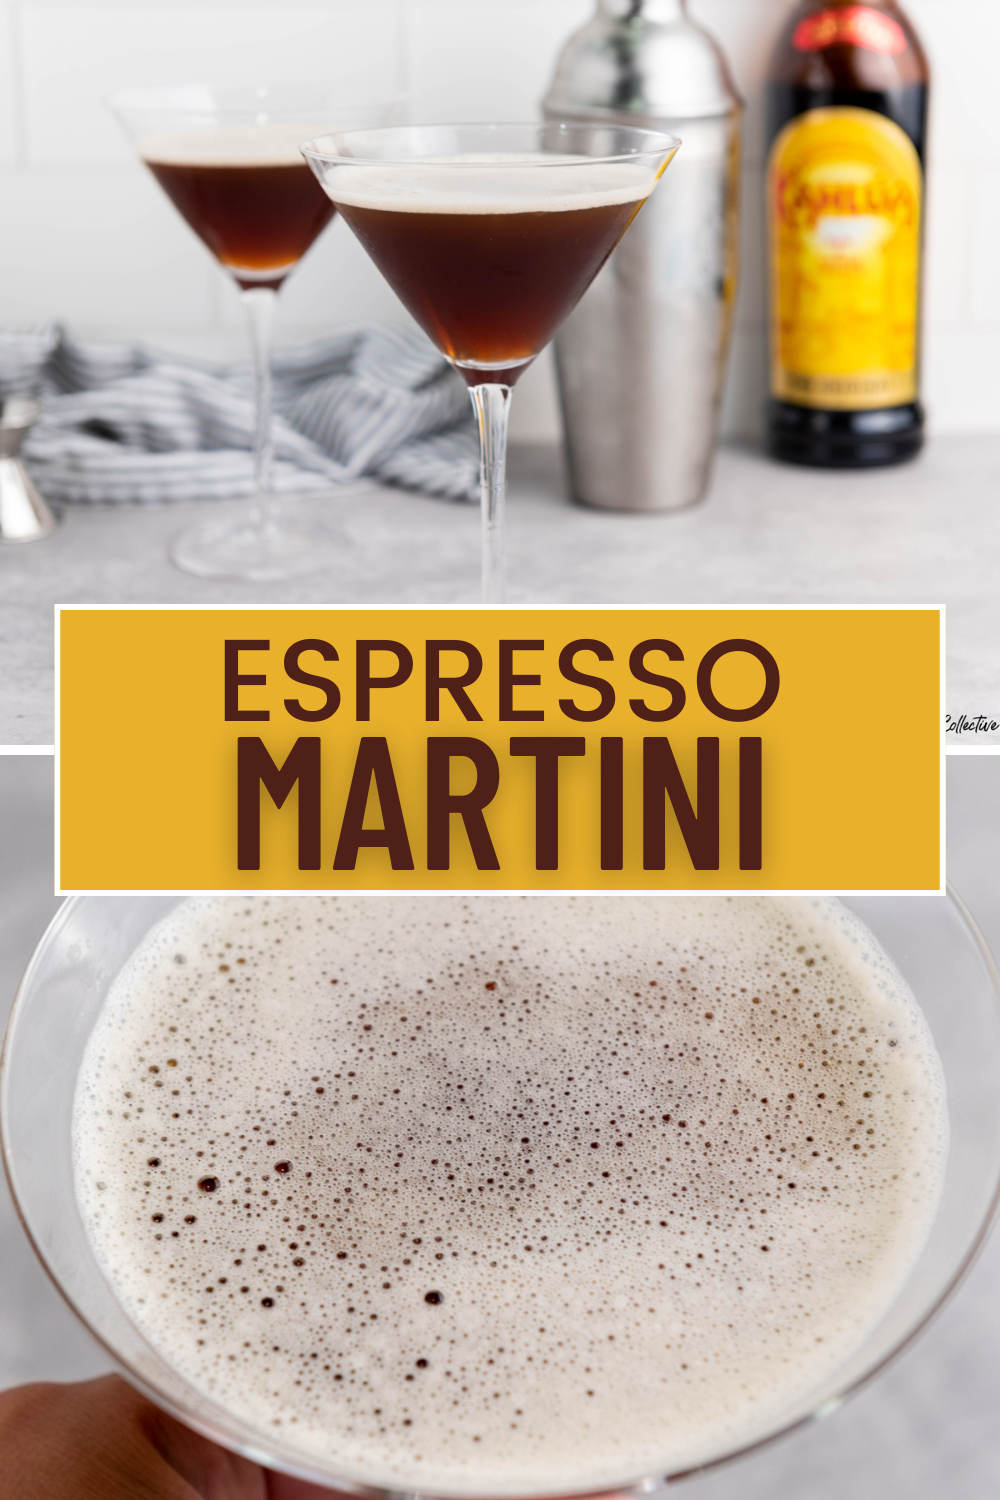 This delicious Espresso Martini comes together with just four stellar ingredients over ice, to make a cocktail that will be your go-to for entertaining and Holiday meetups!